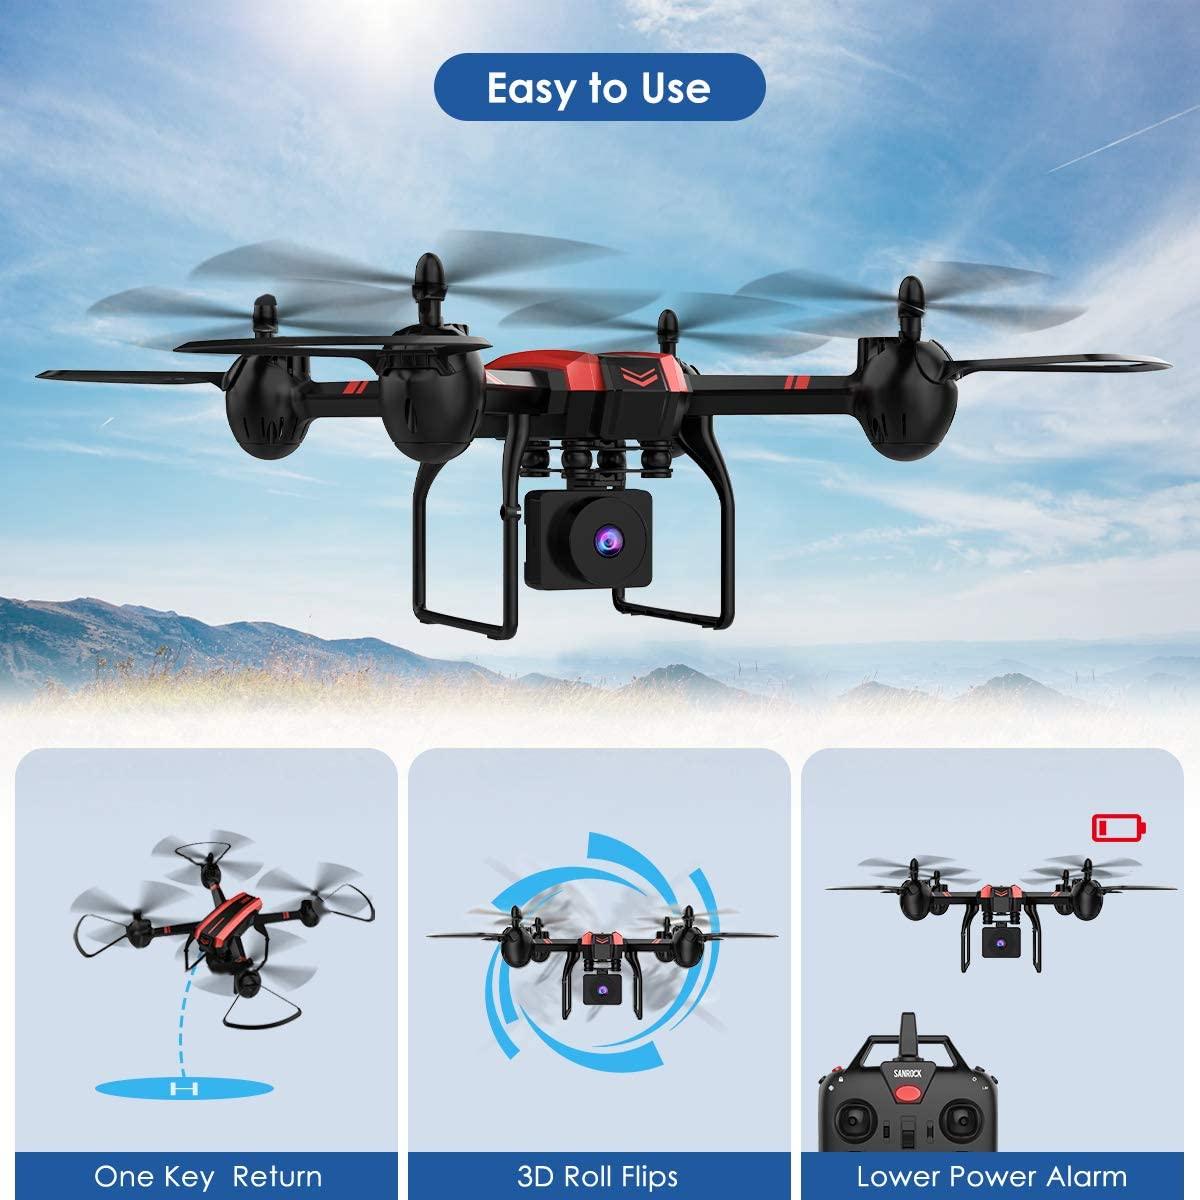 SANROCK X105W Drone - for Adults And Kids, 1080P HD Camera RC Quadcopter for Beginners, Wifi Live Video Cam, App Control, Altitude Hold, Headless Mode, Trajectory Flight, Gravity Sensor, 3D Flip - RCDrone